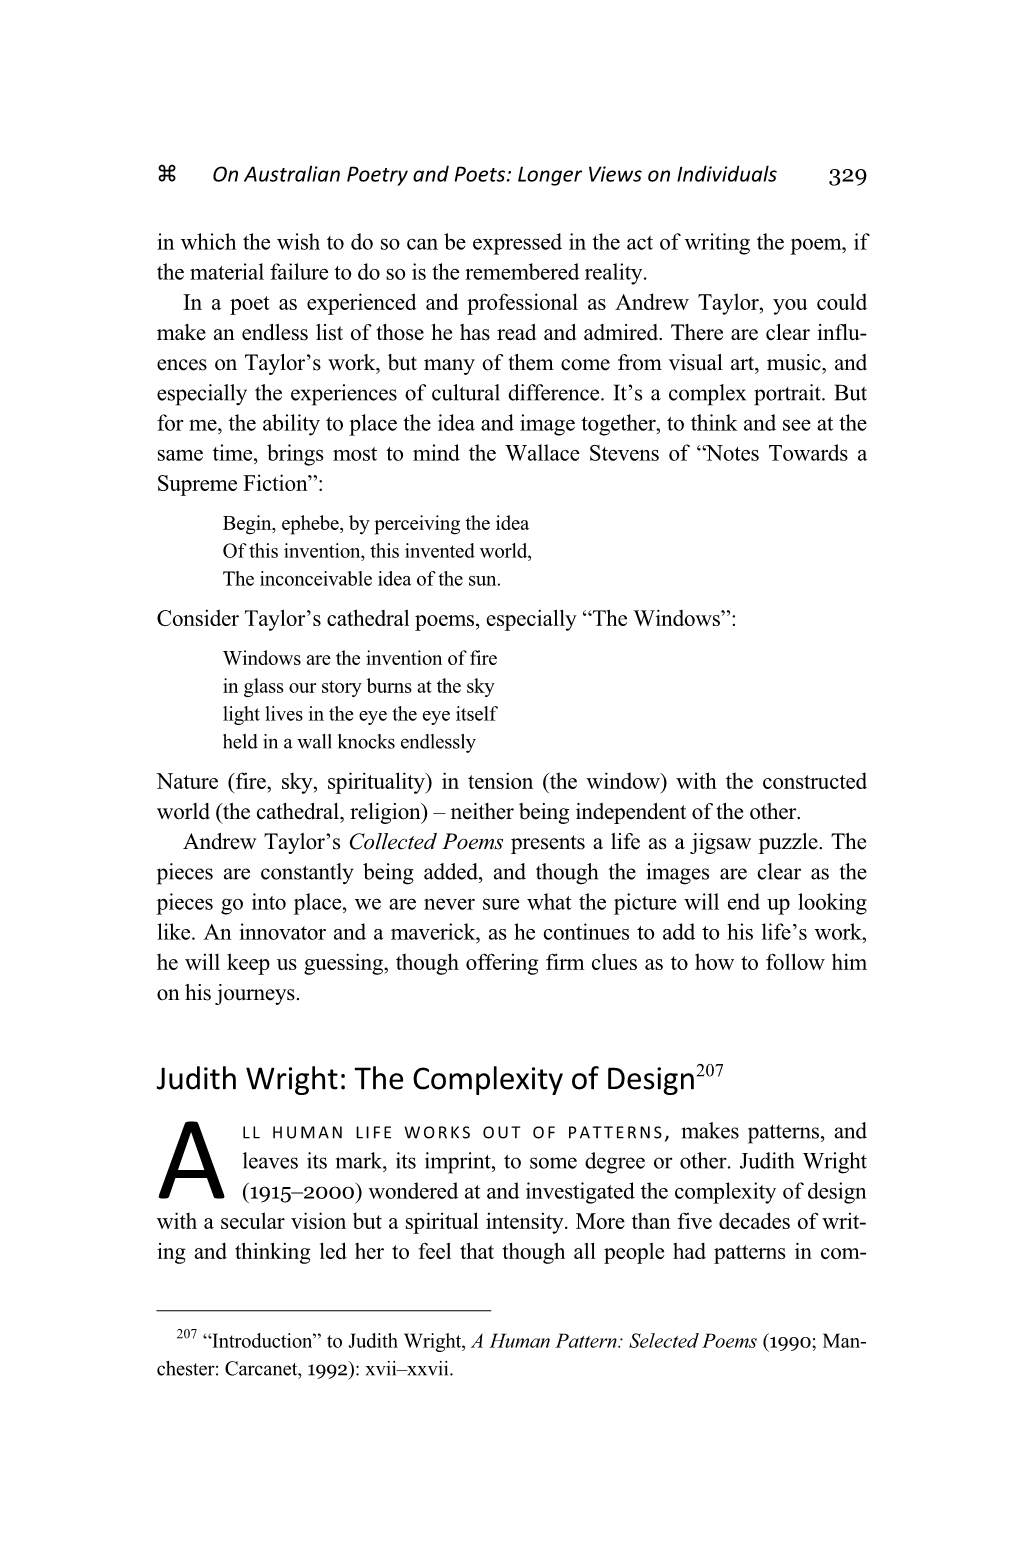 Judith Wright: the Complexity of Design207